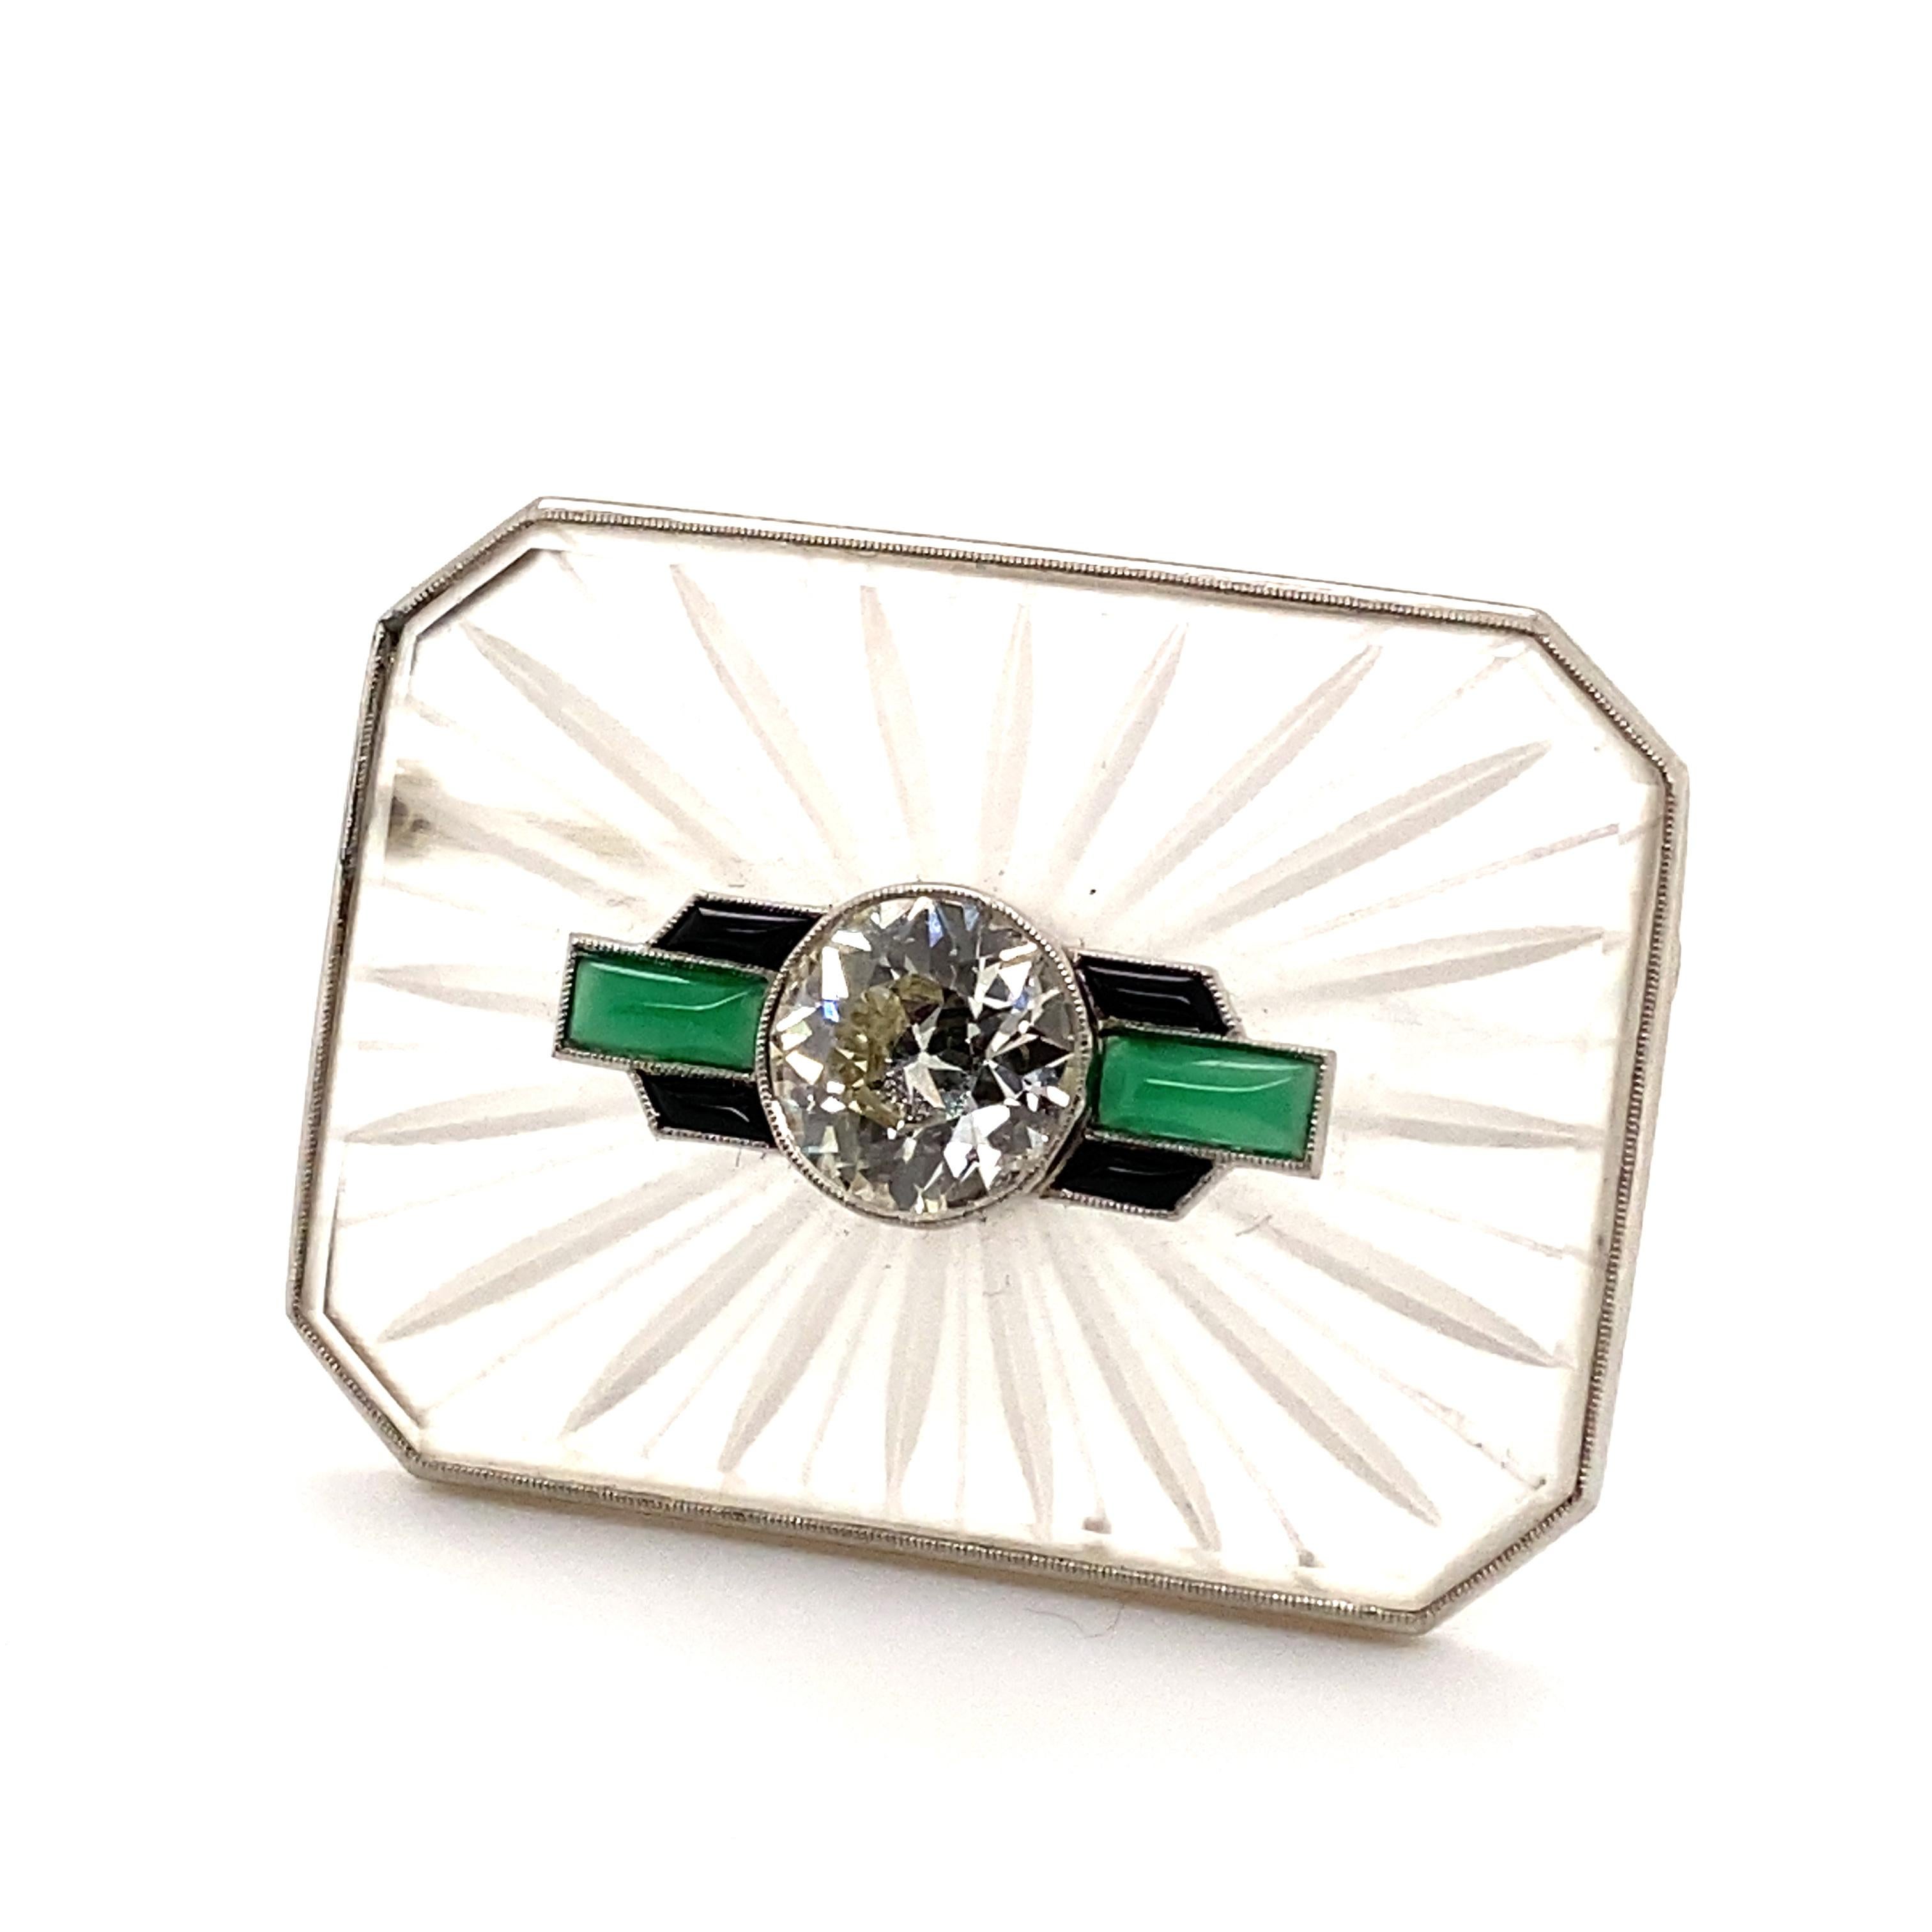 Handmade in platinum 950 and with decorative millegrain settings, this beautiful brooch combines various very typical elements for Art Deco jewellery.

The basic element is an octagonal-cut rock crystal quartz, which is engraved radially on the